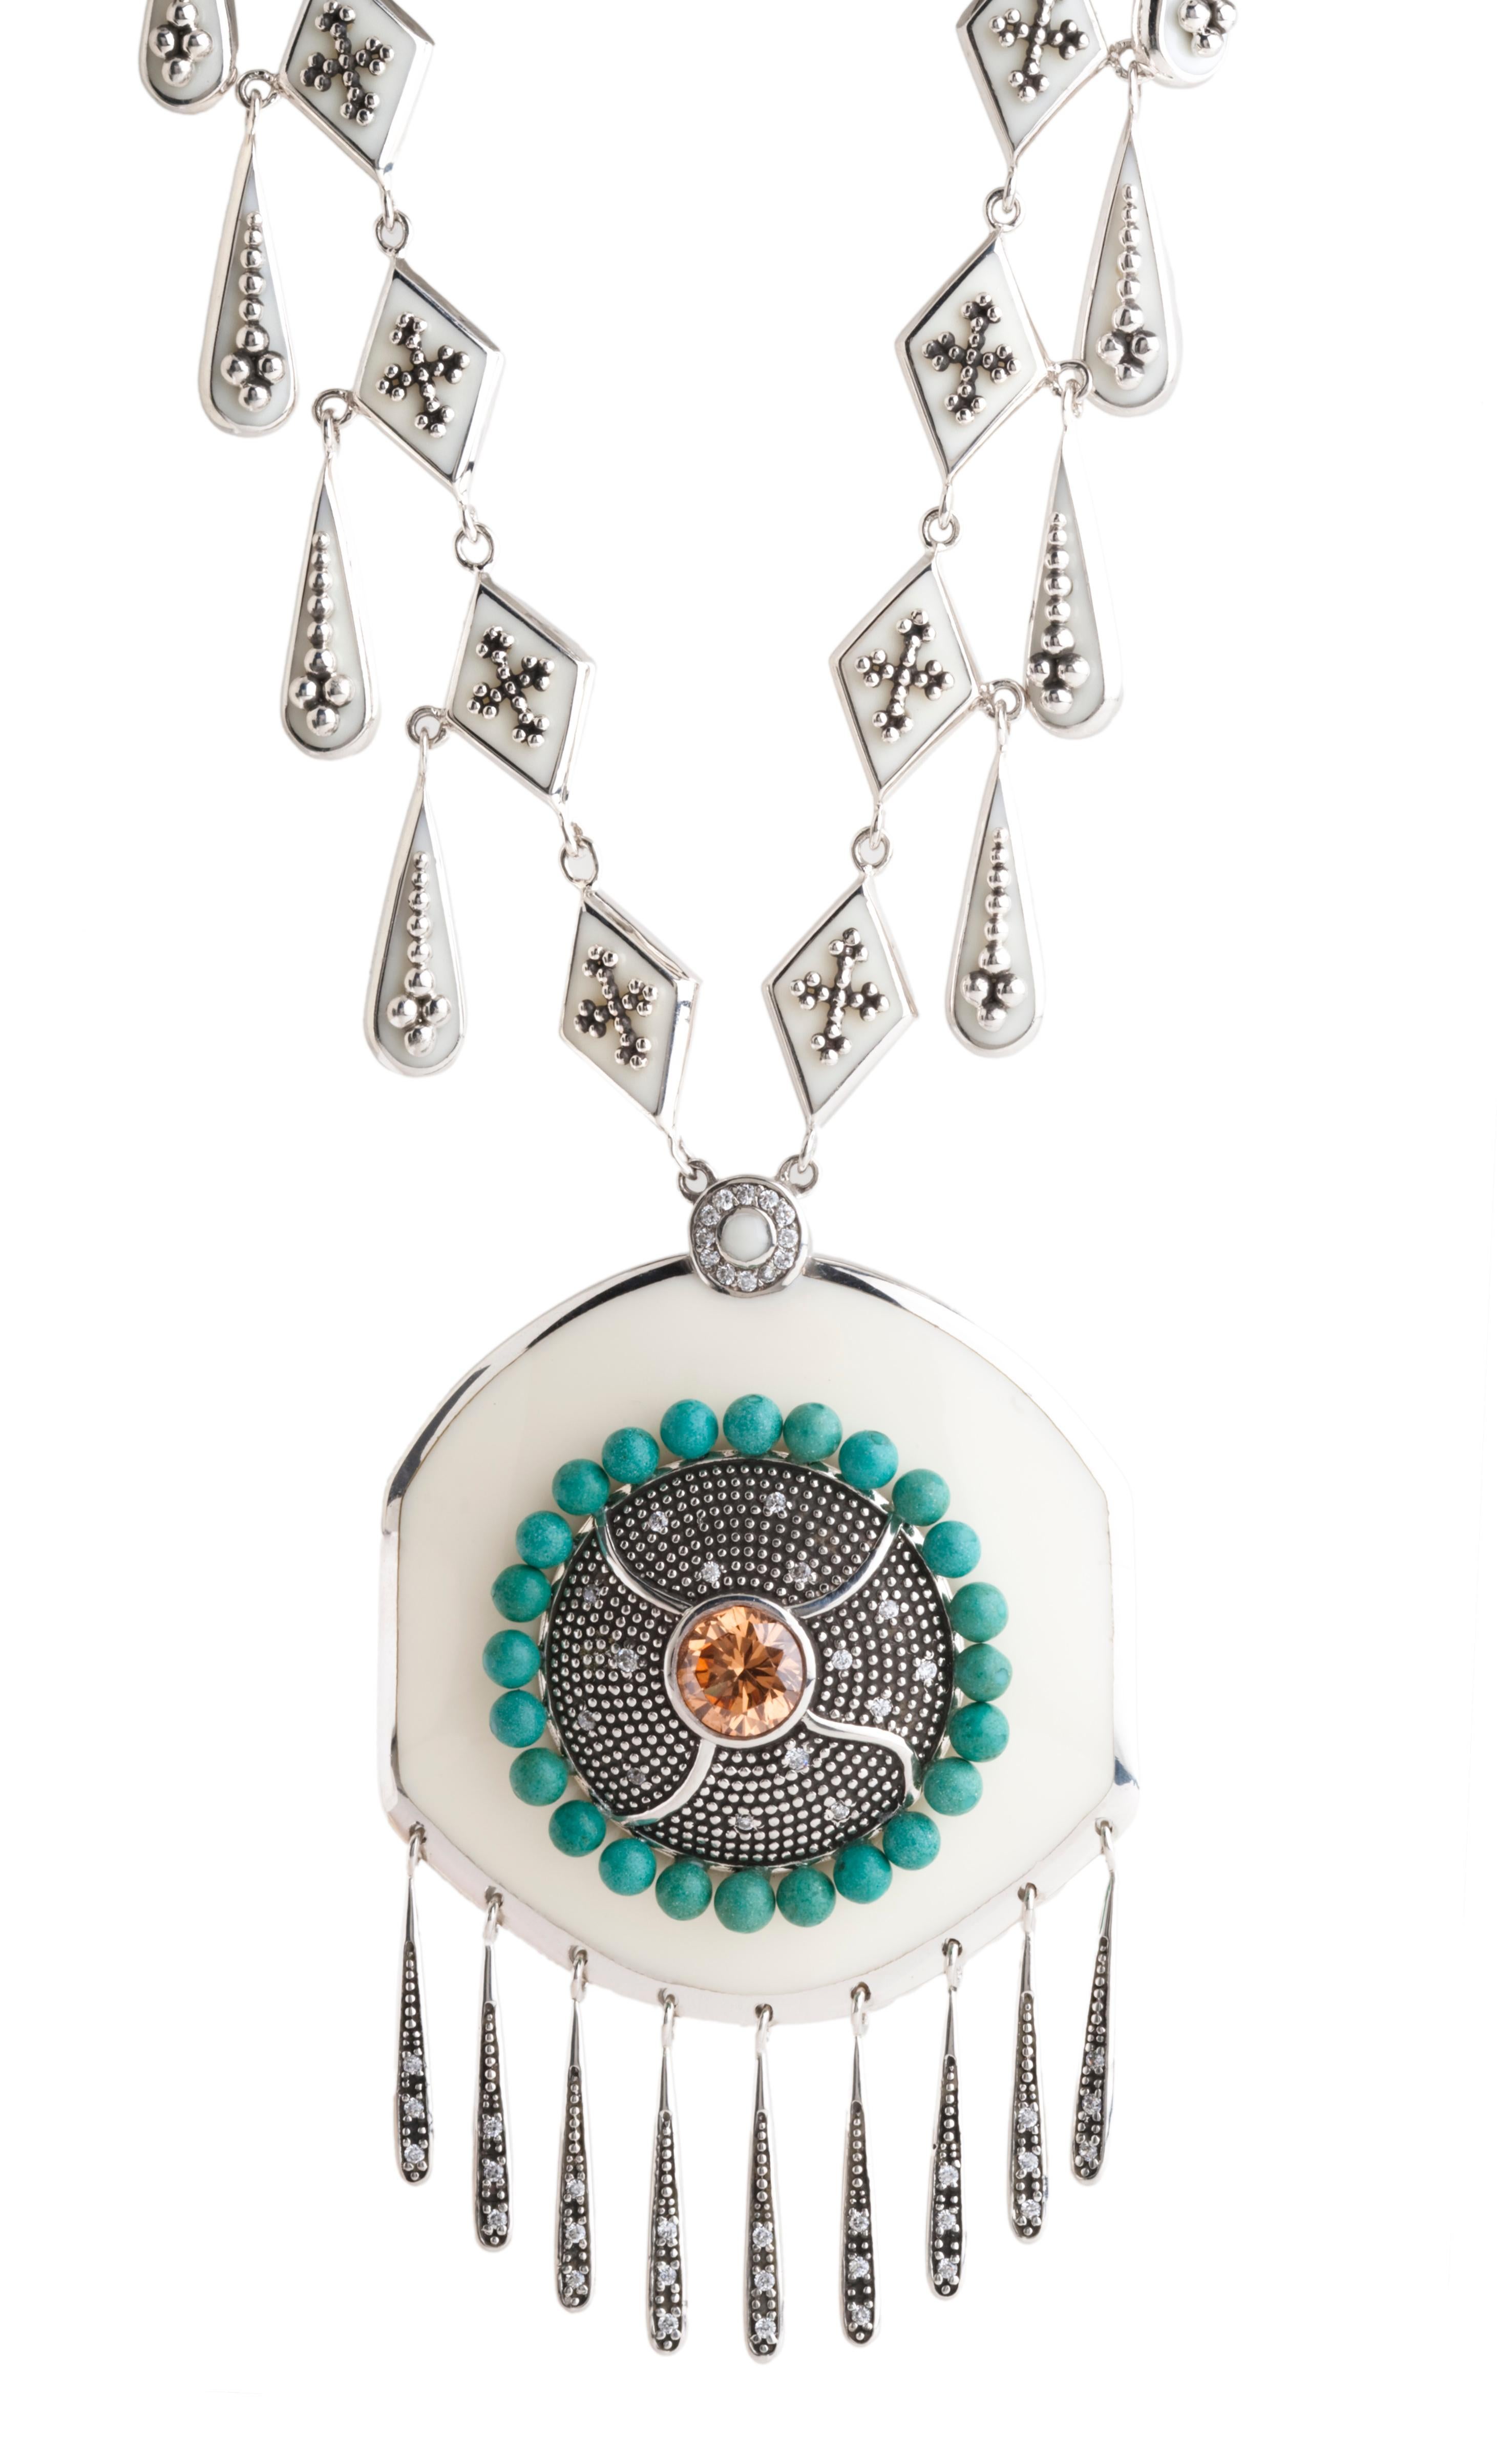 Miriam Salat long drop necklace features White resin with vintage sterling silver.
Perfect for your summer days and nights. From caftan to evening wear. 
Cubic zircon full diamond facet rounds, prong set.
necklace is full length.
Measures apx 24